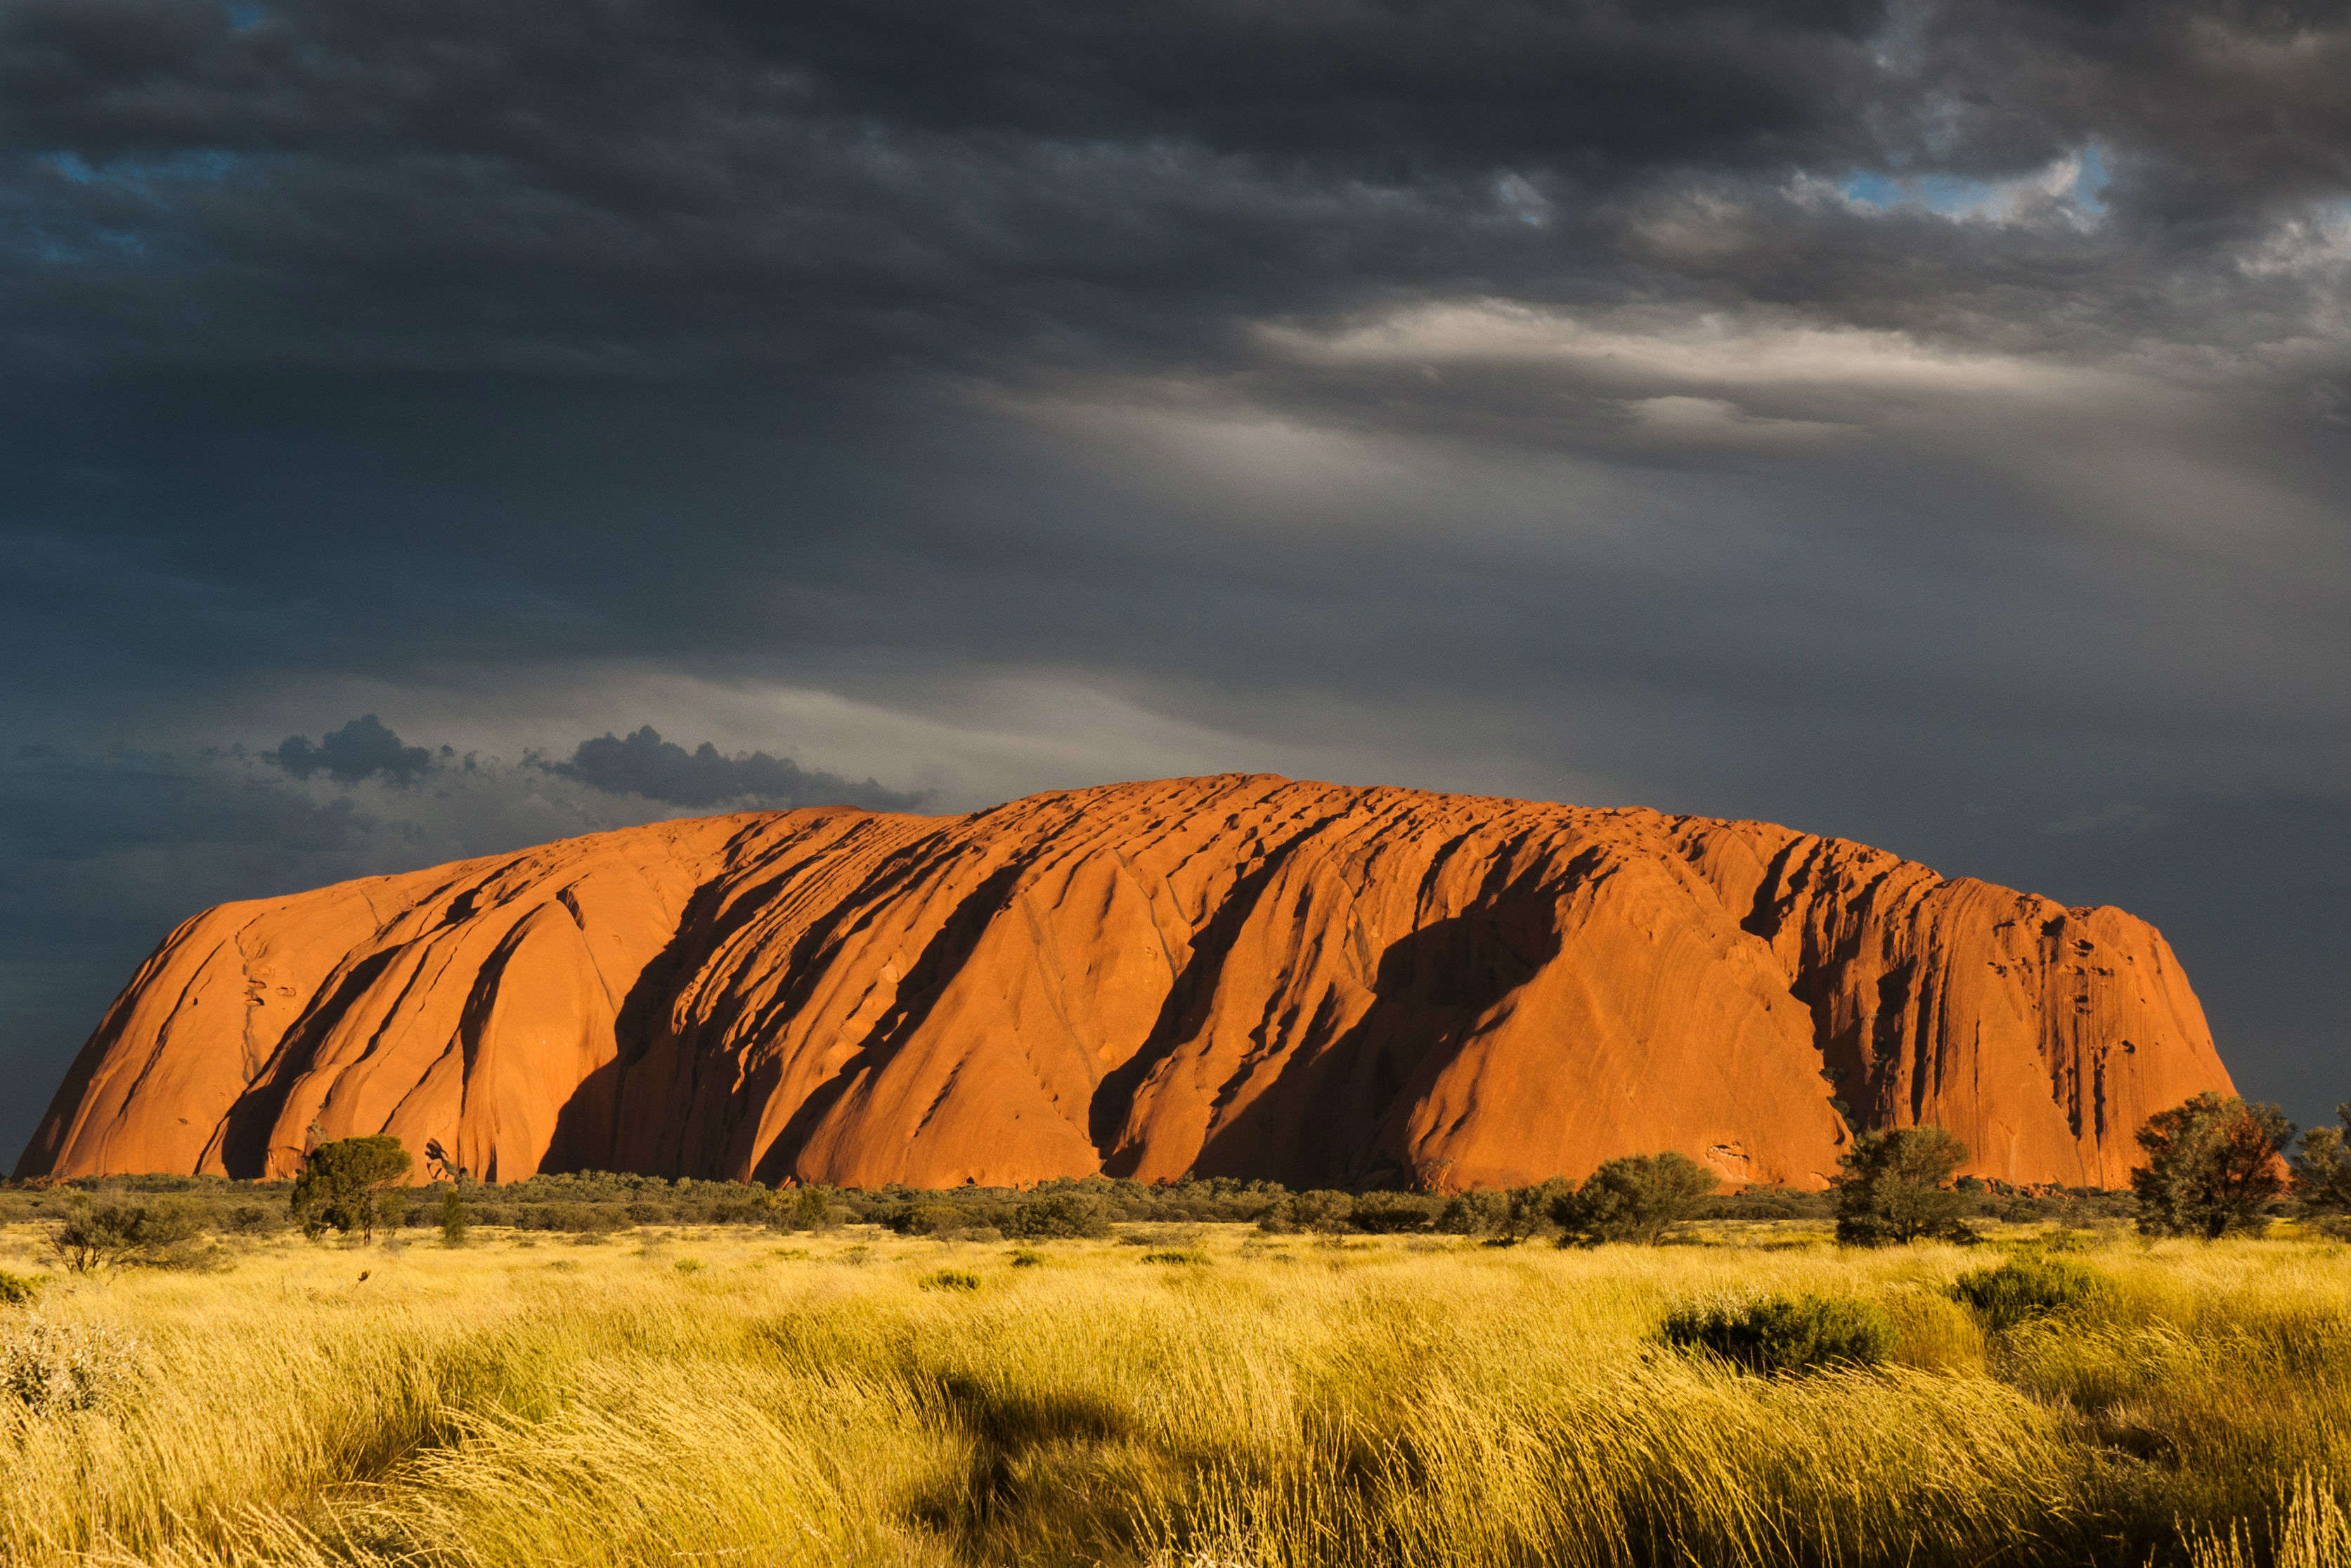 As Uluru climbing ban date approaches, more tourists flock to disrespect sentiments and climb the rock